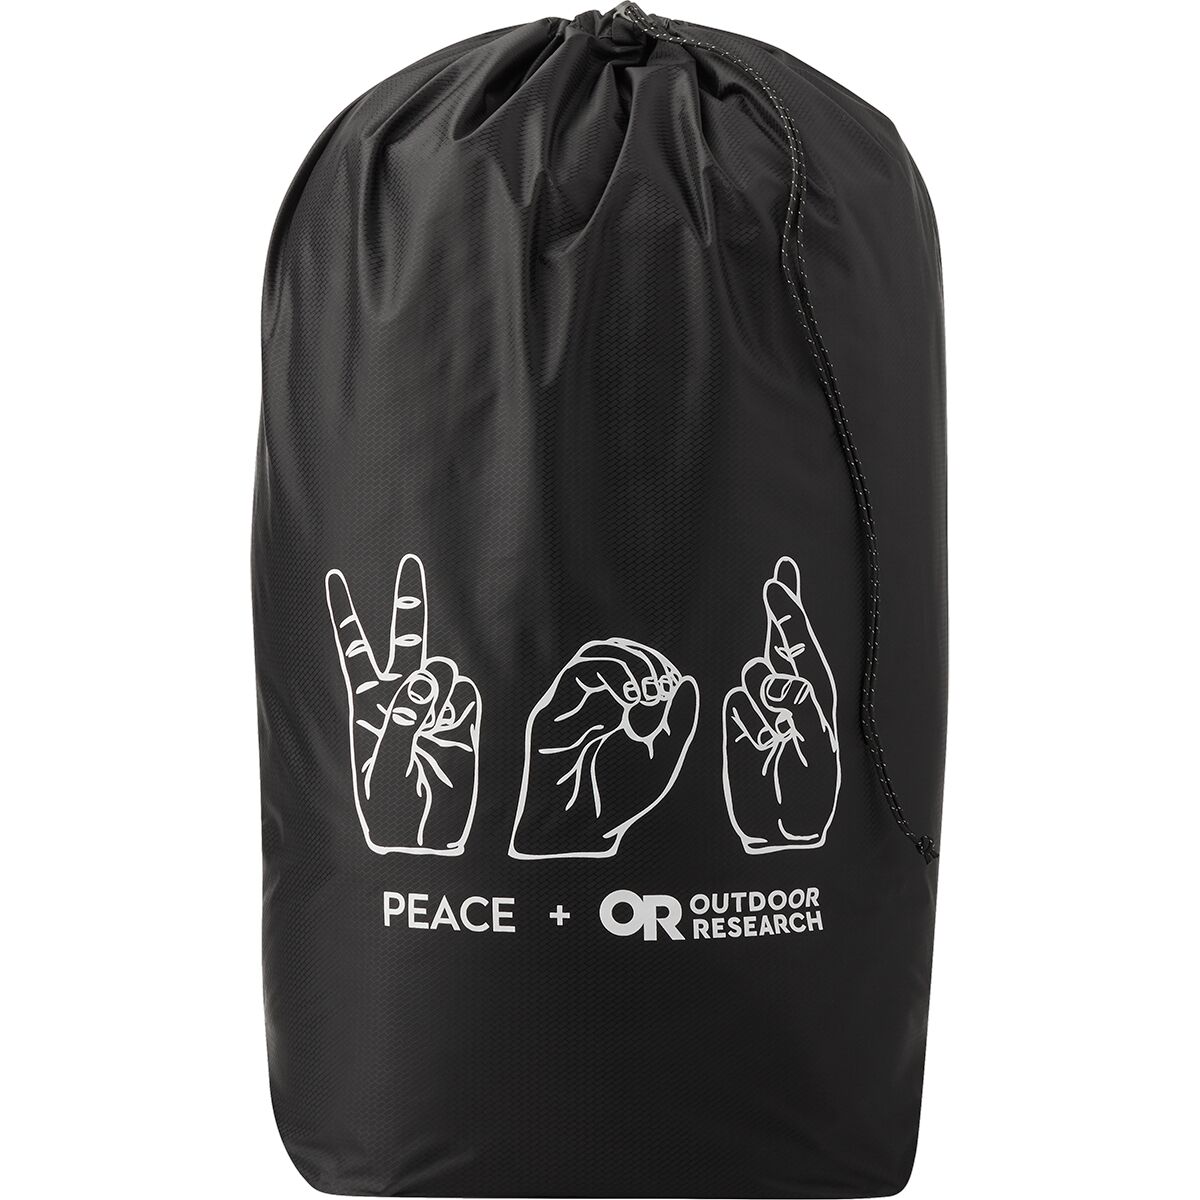 Outdoor Research PackOut Graphic 5L Stuff Sack